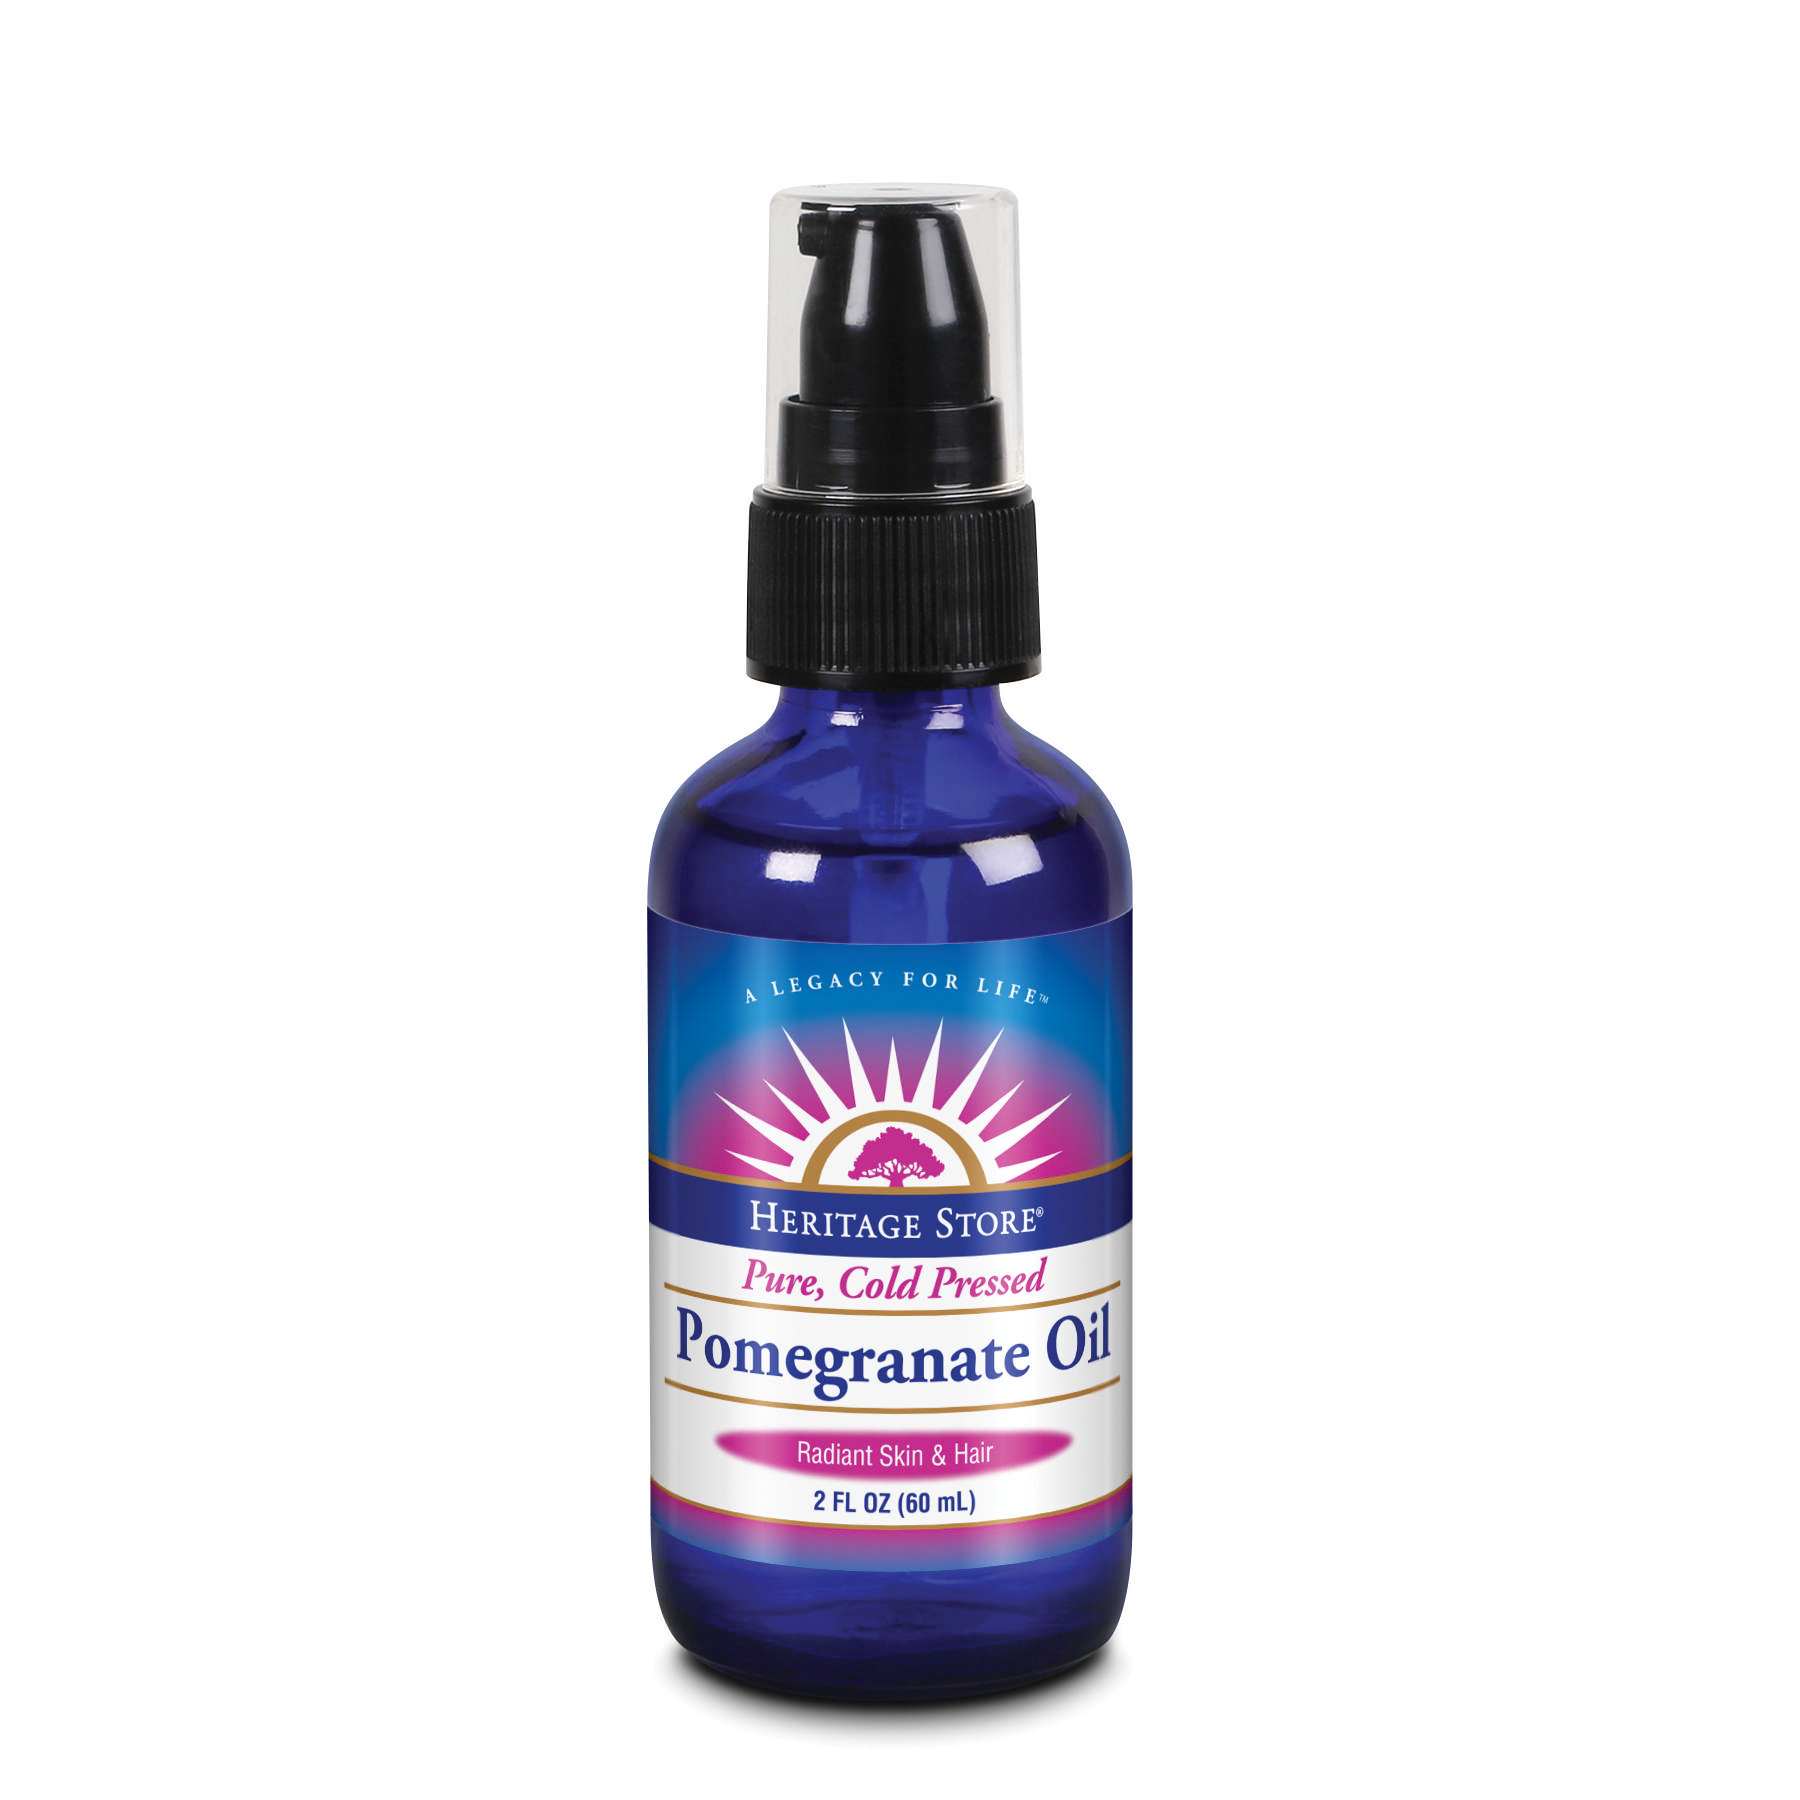 Heritage Store - Pomegranate Seed Oil Frag Free